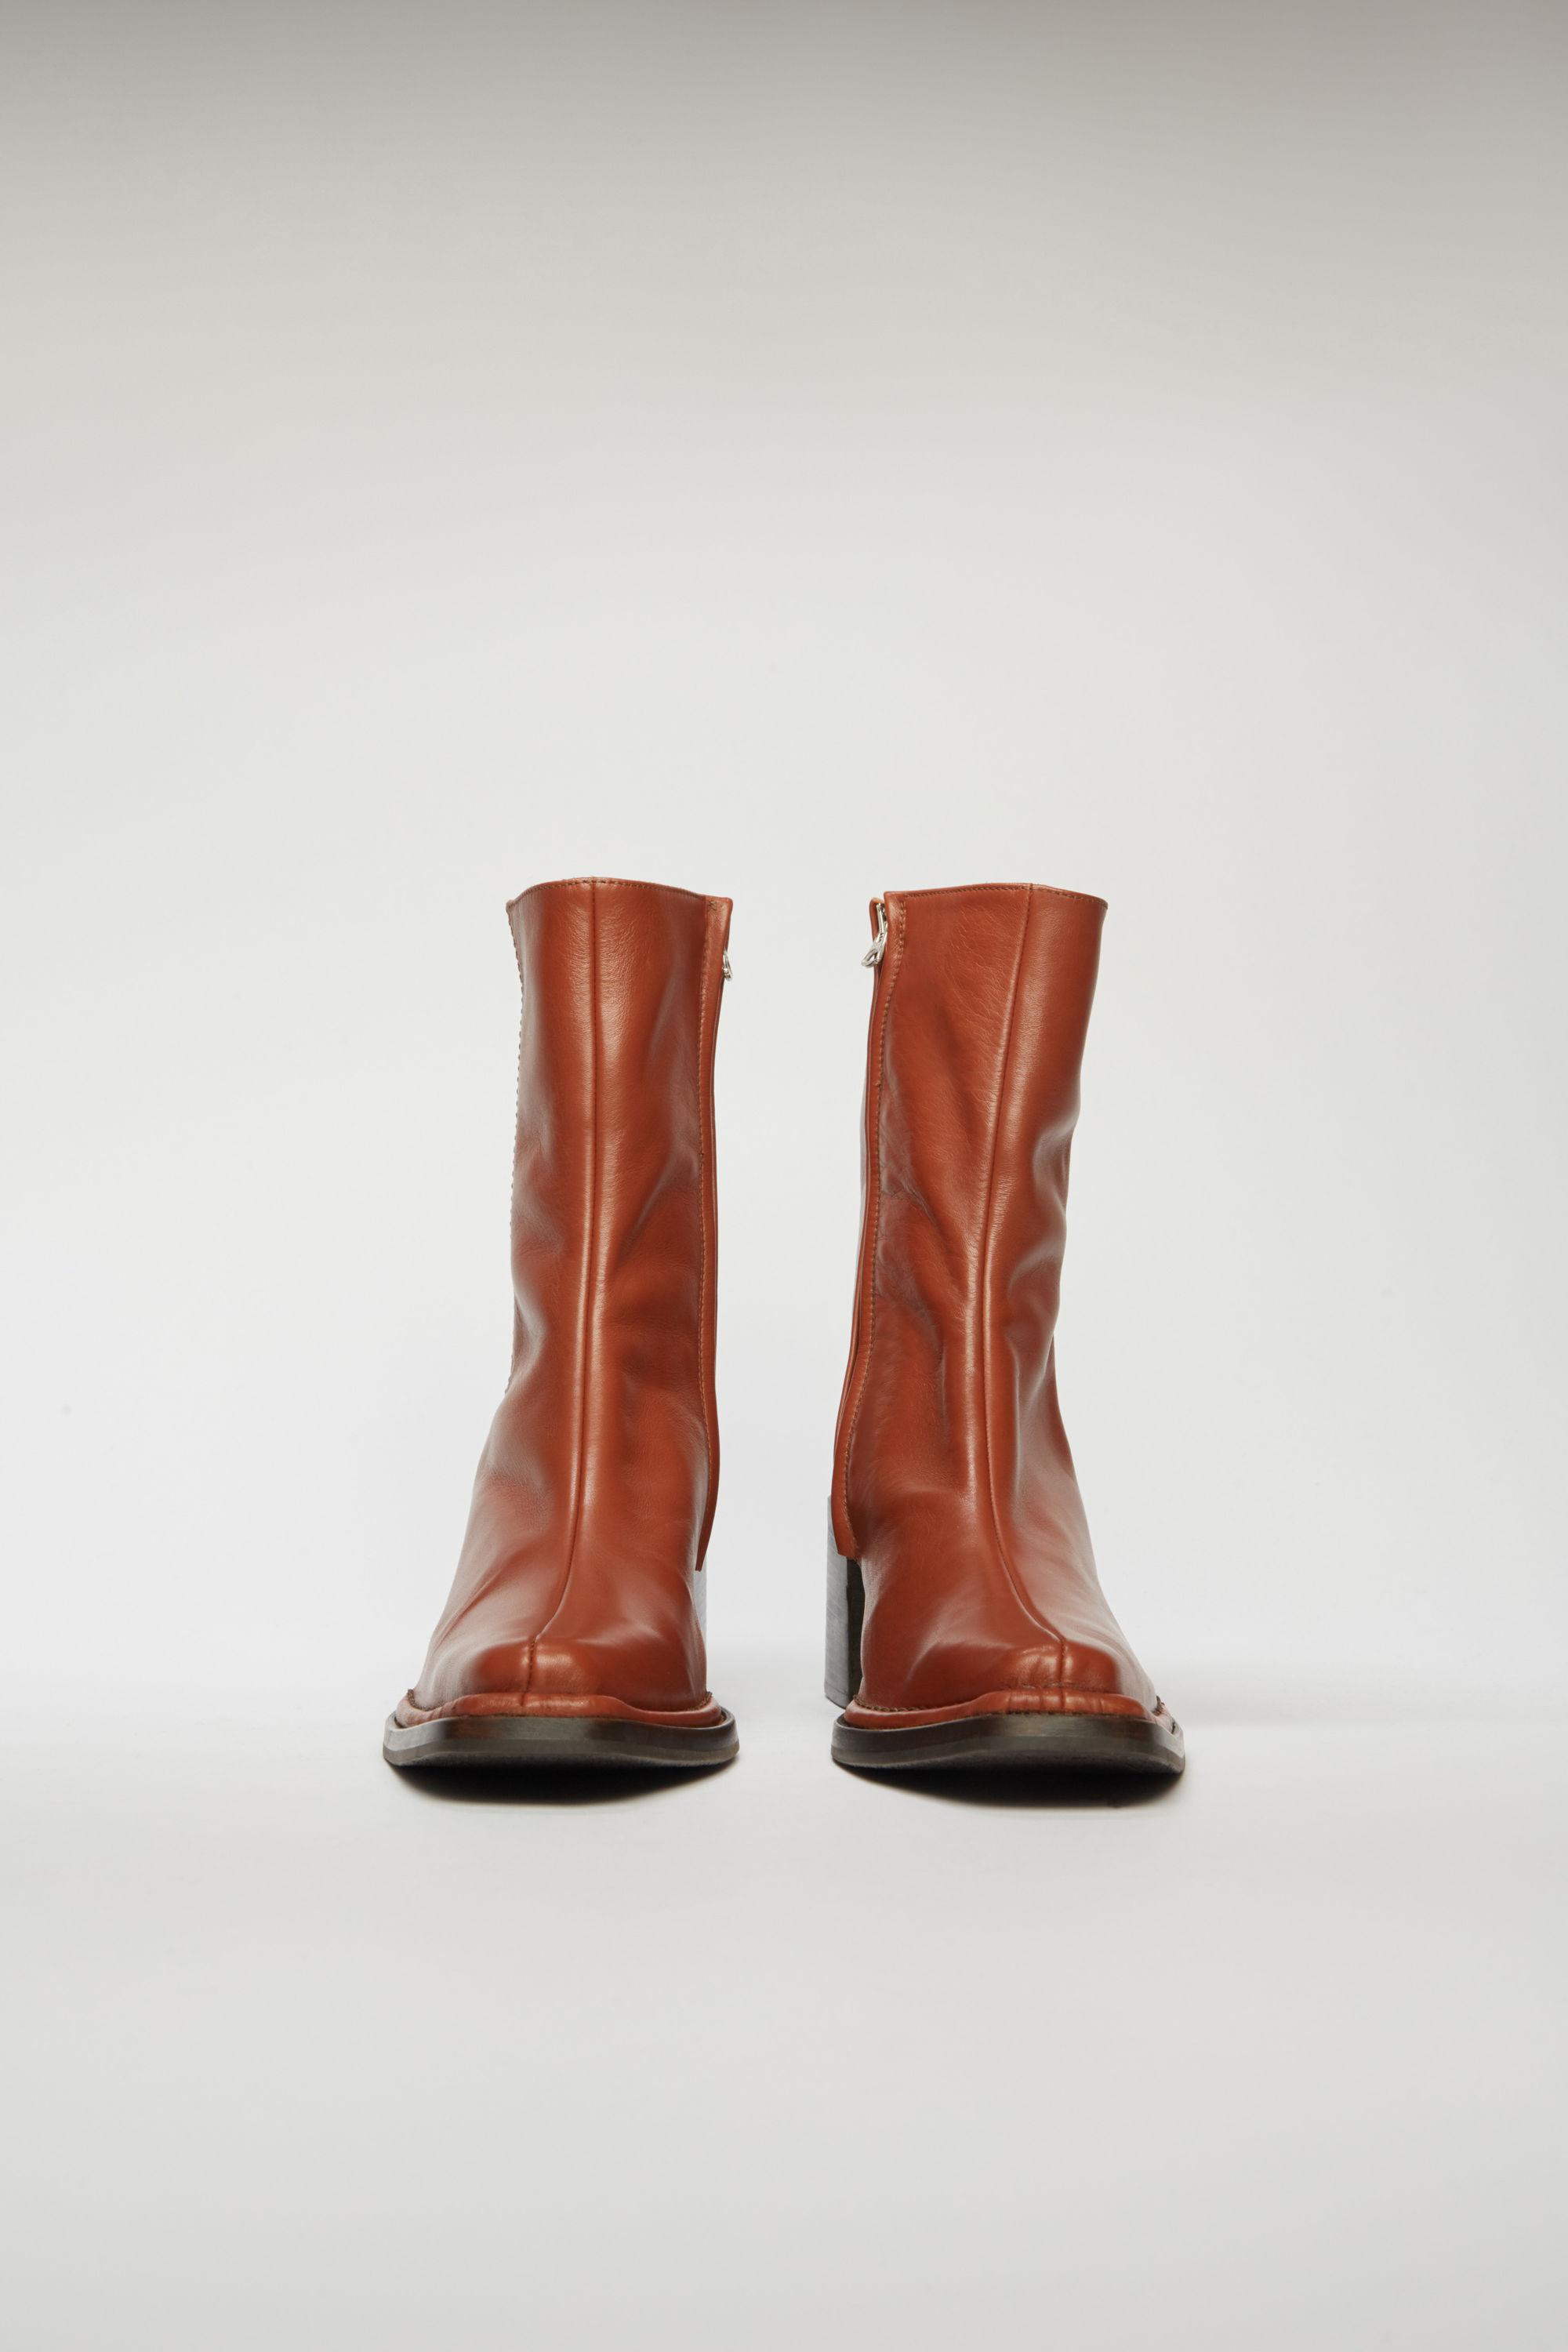 Acne Studios Fn-wn-shoe000267 Brown/brown Leather Mid-calf Boots - Lyst